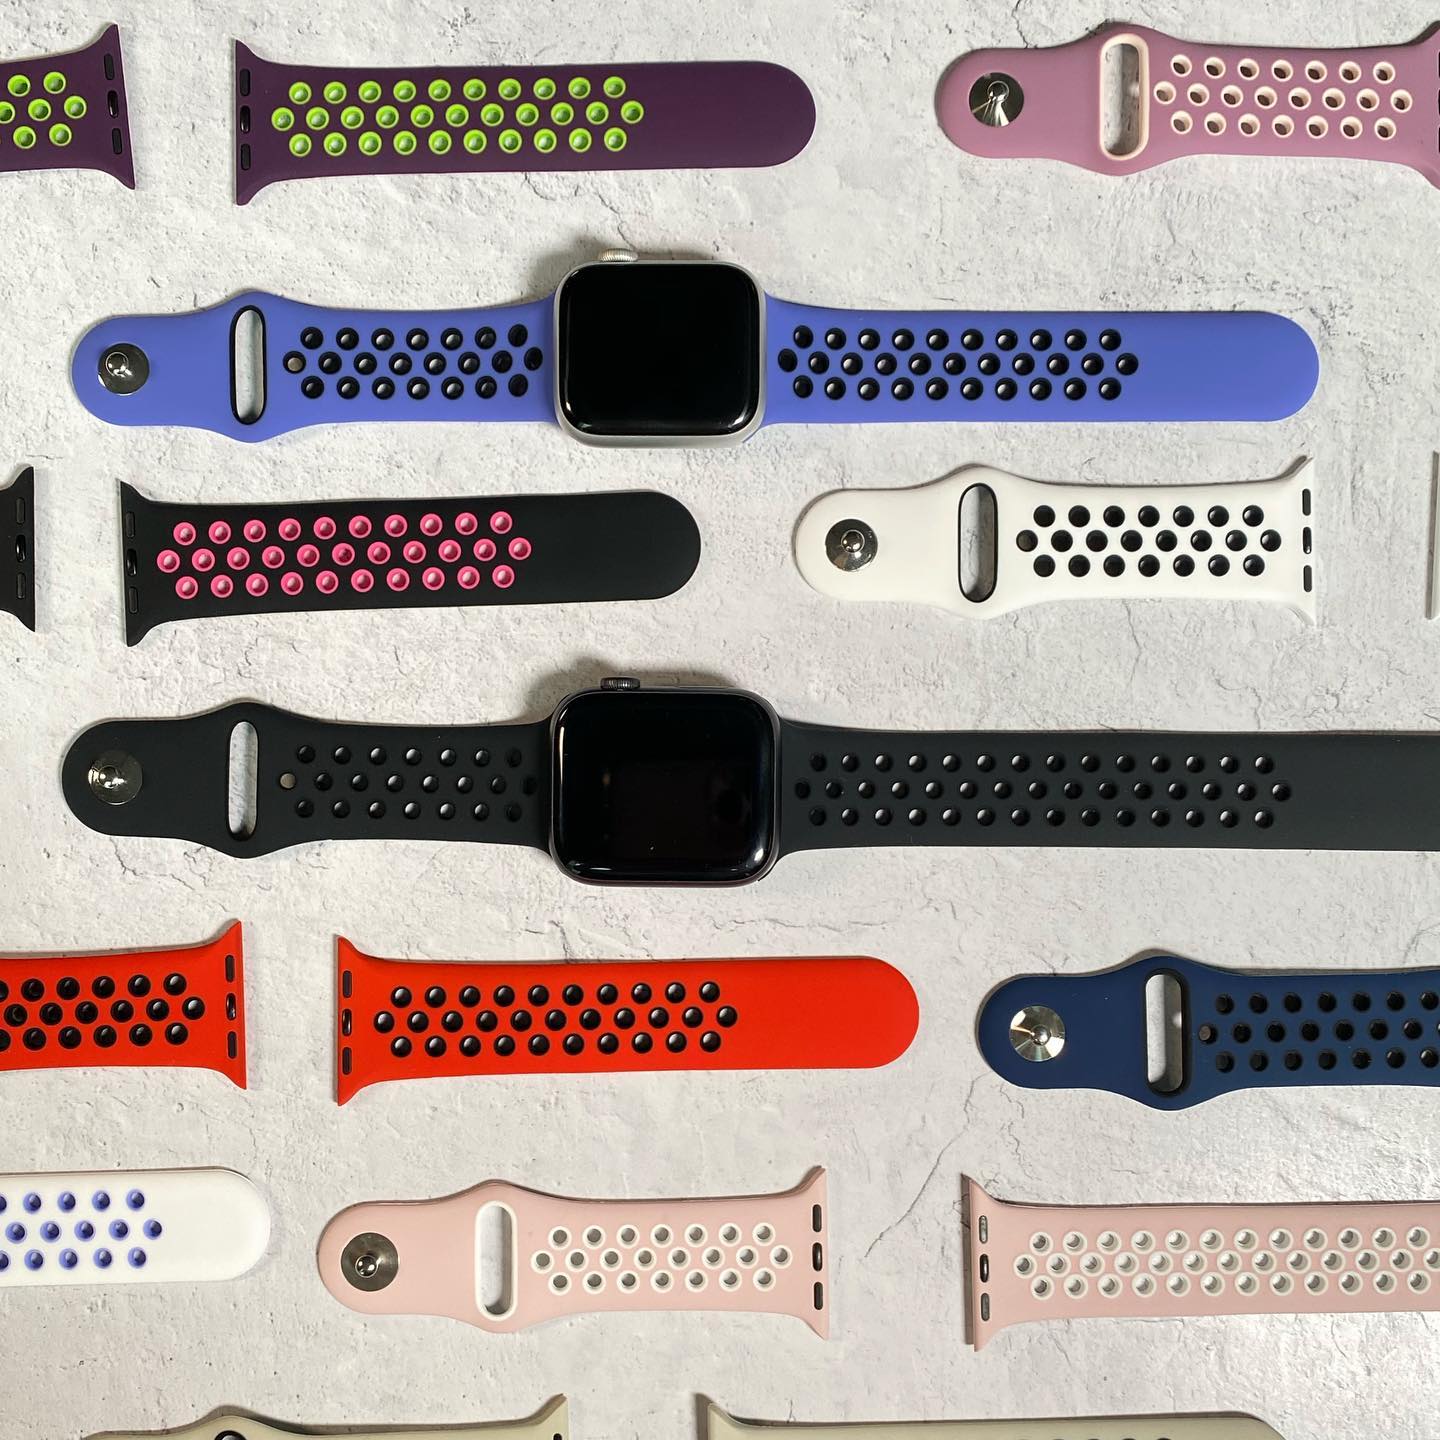 Non-personalized watchbands